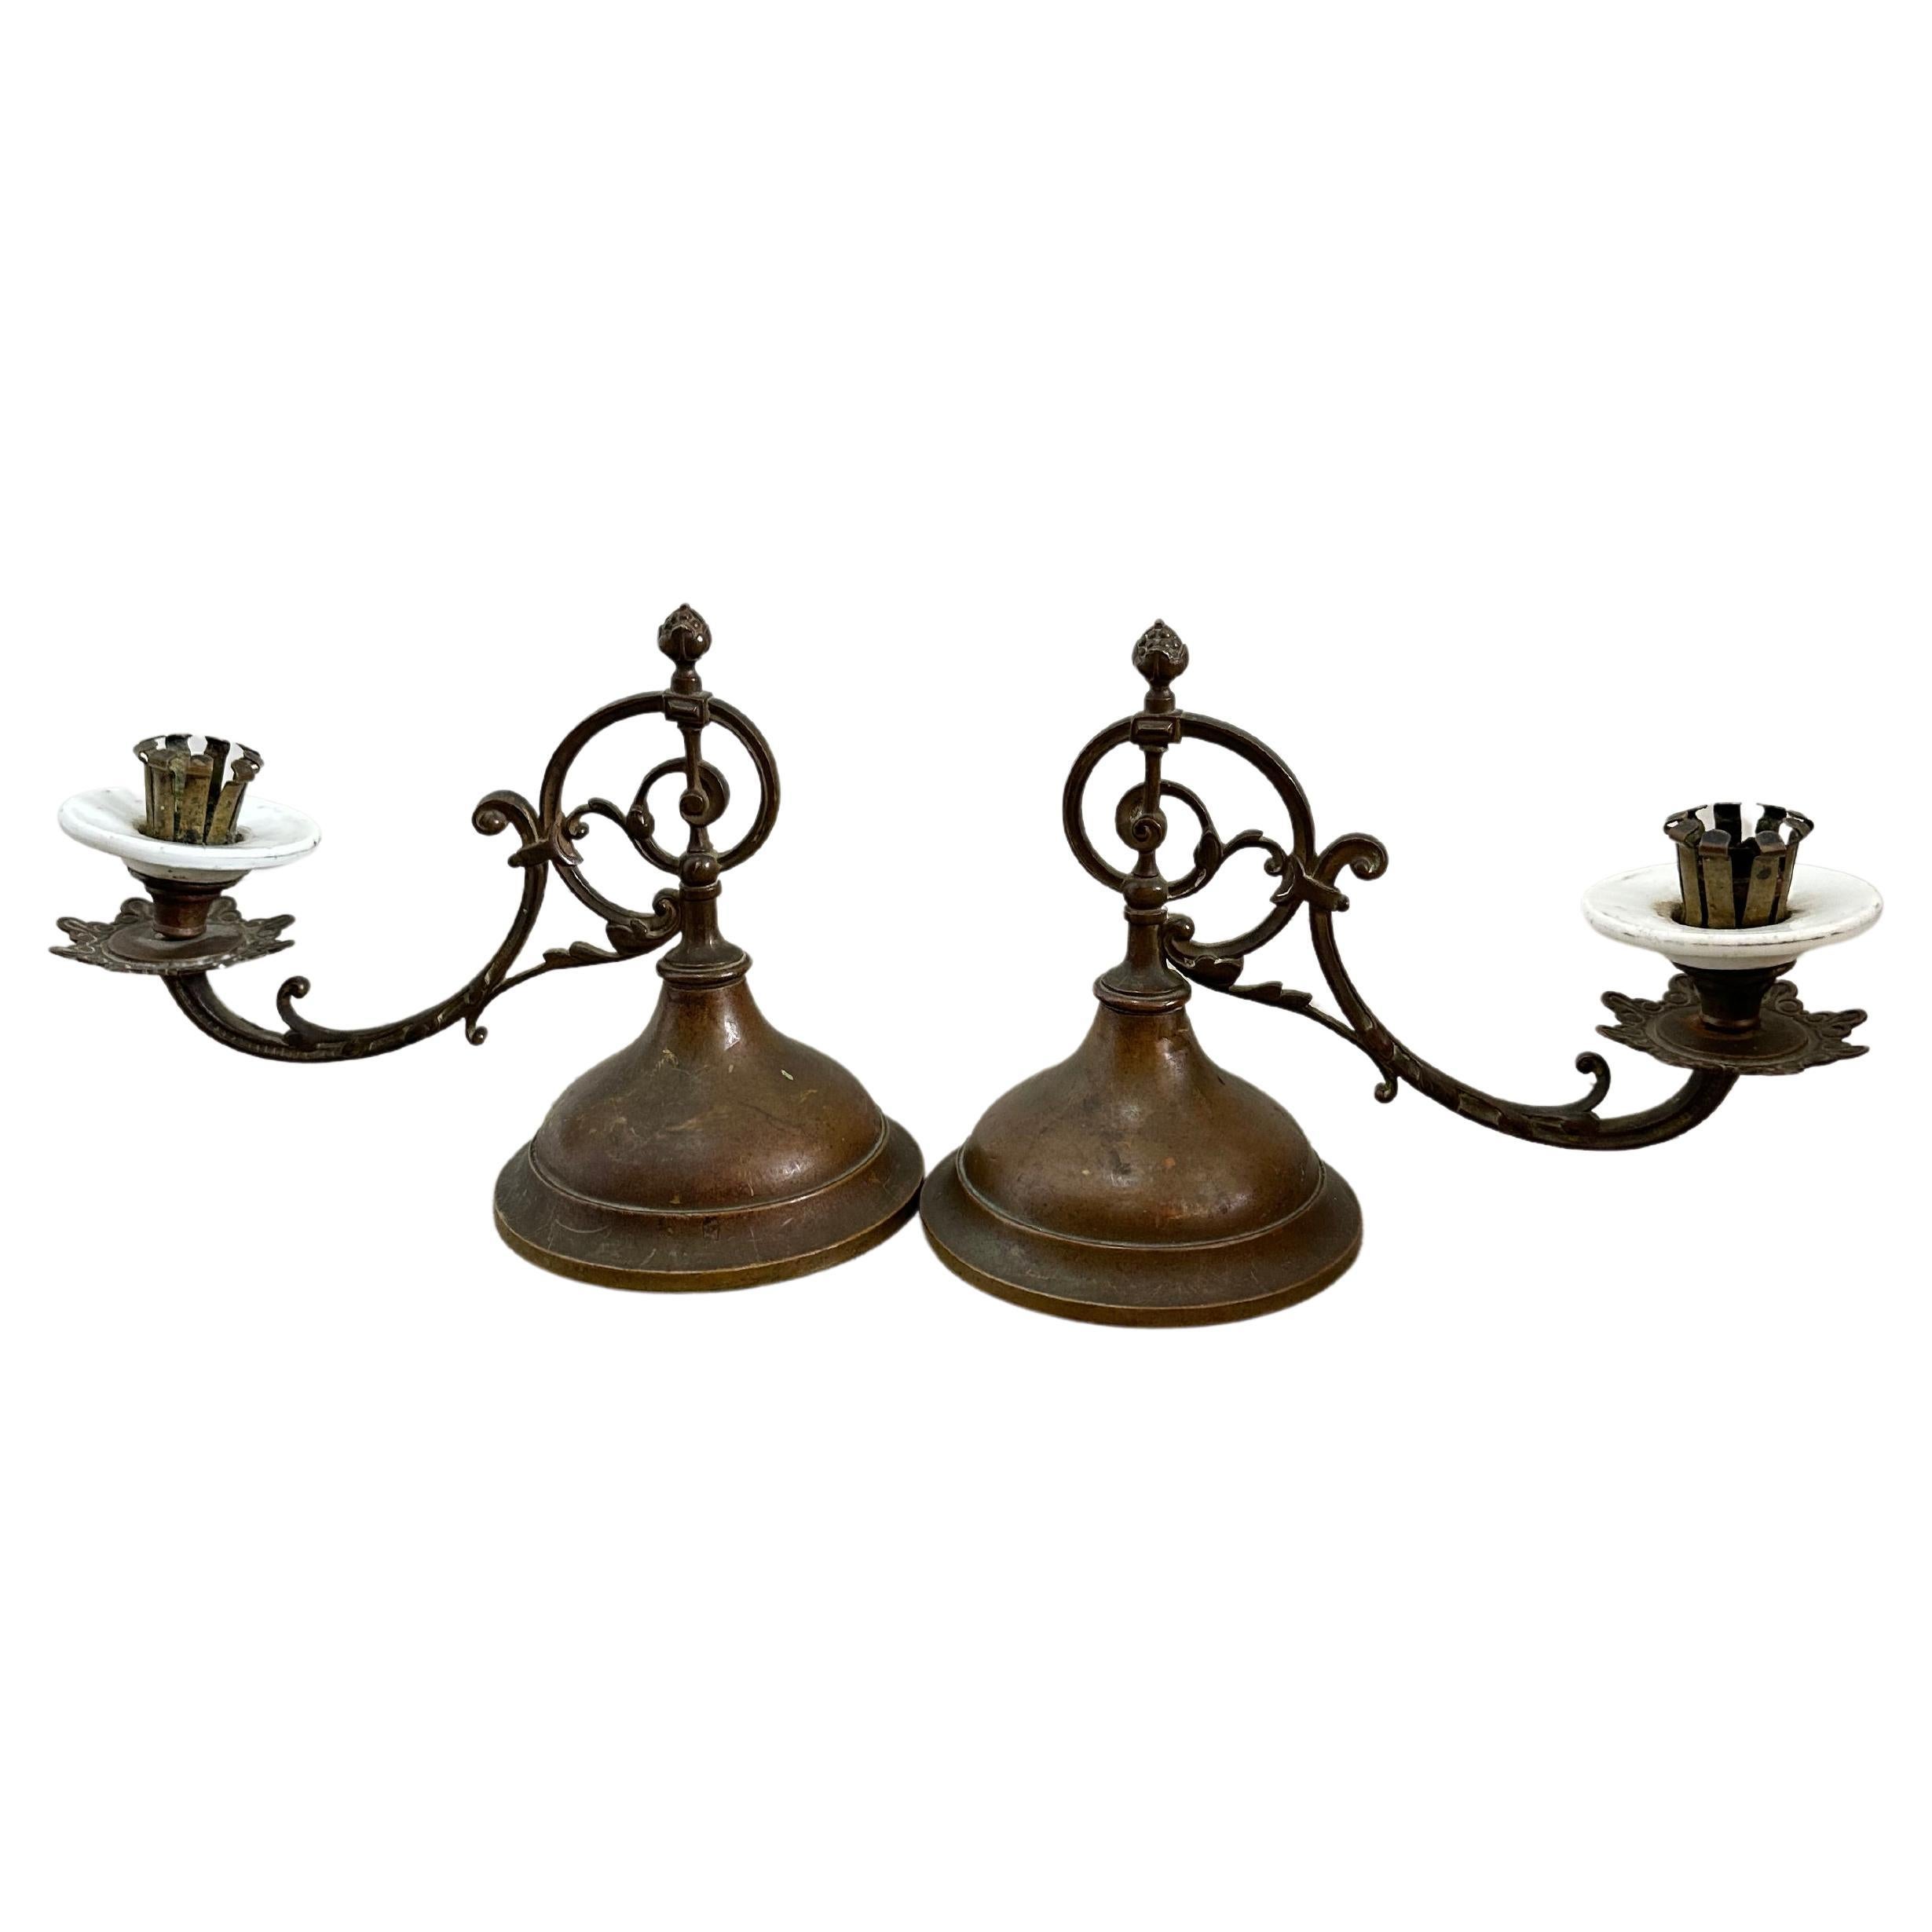 American Brass and Porcelain Turnable Candle Holders, 1800 For Sale